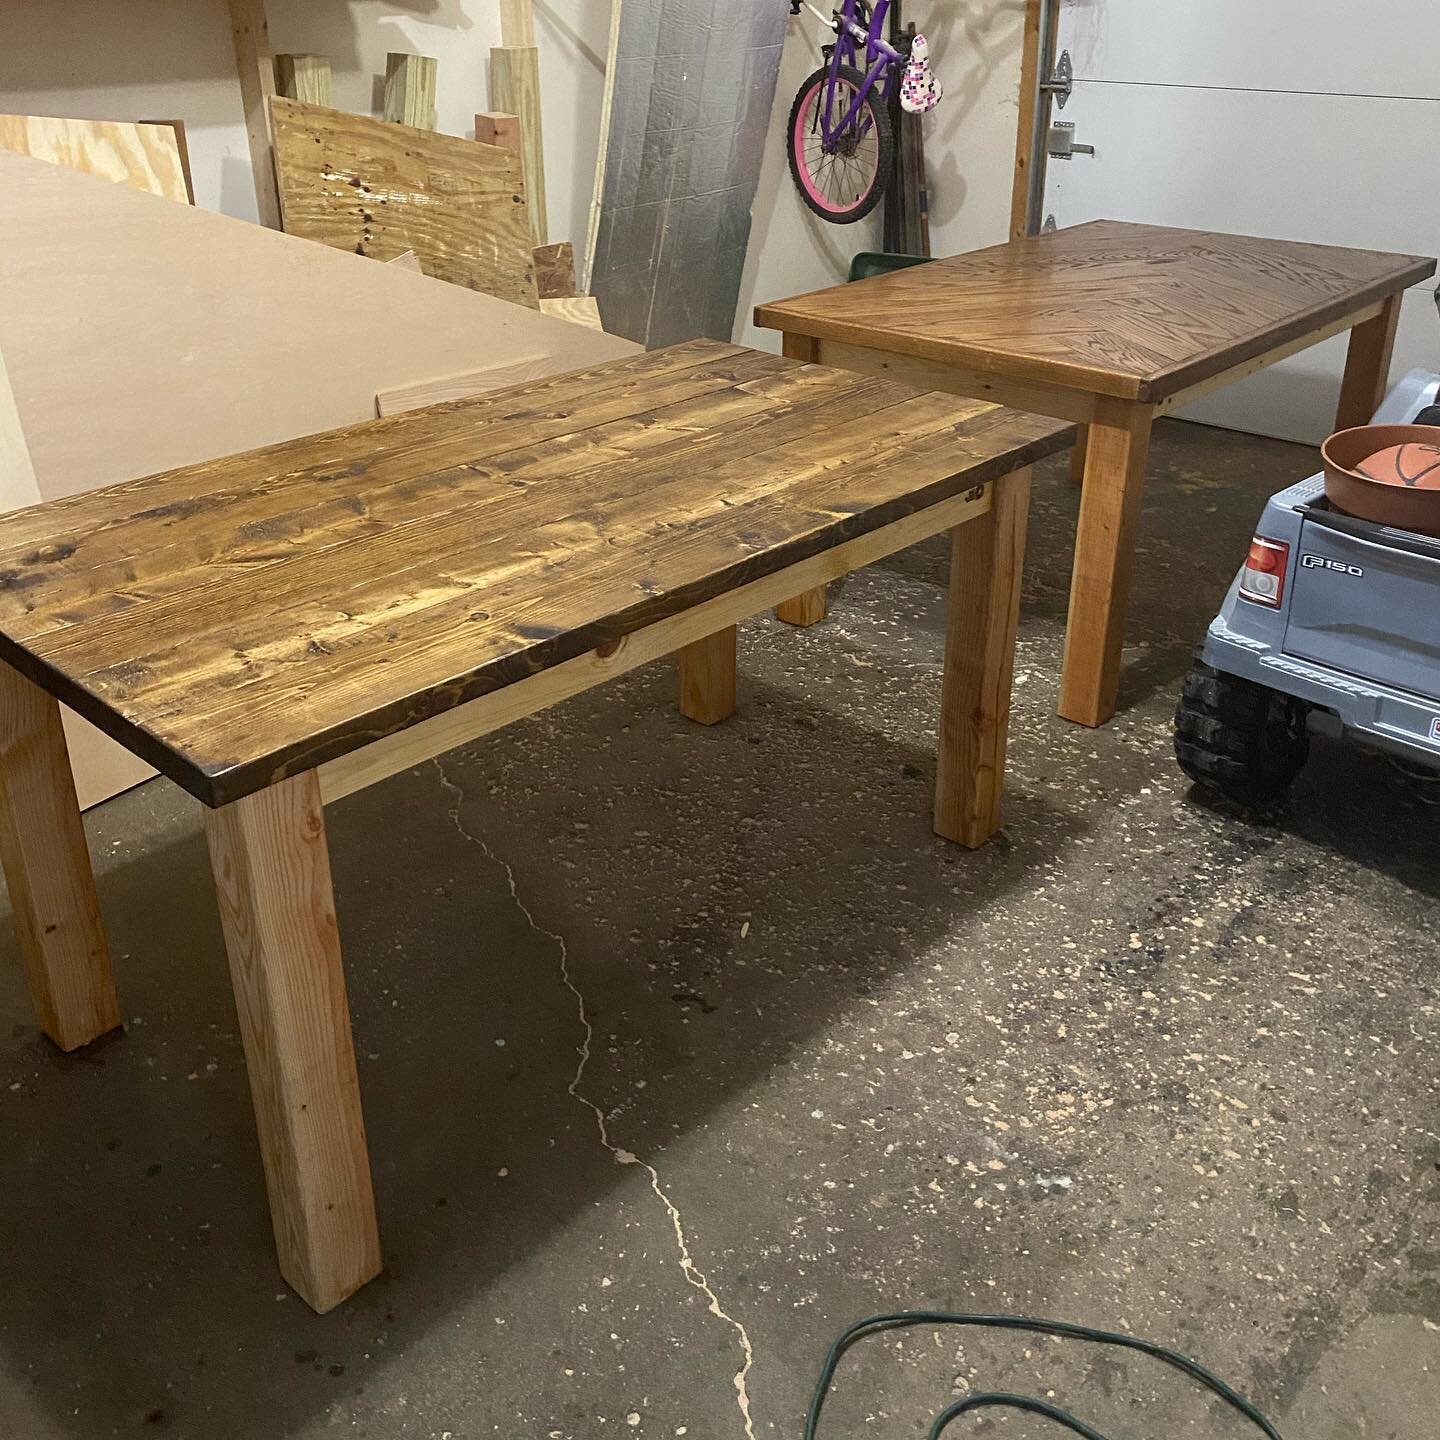 The @yelpmke 6 seater dining table is for sale 🥰 and will be ready for deliver this weekend 🥰